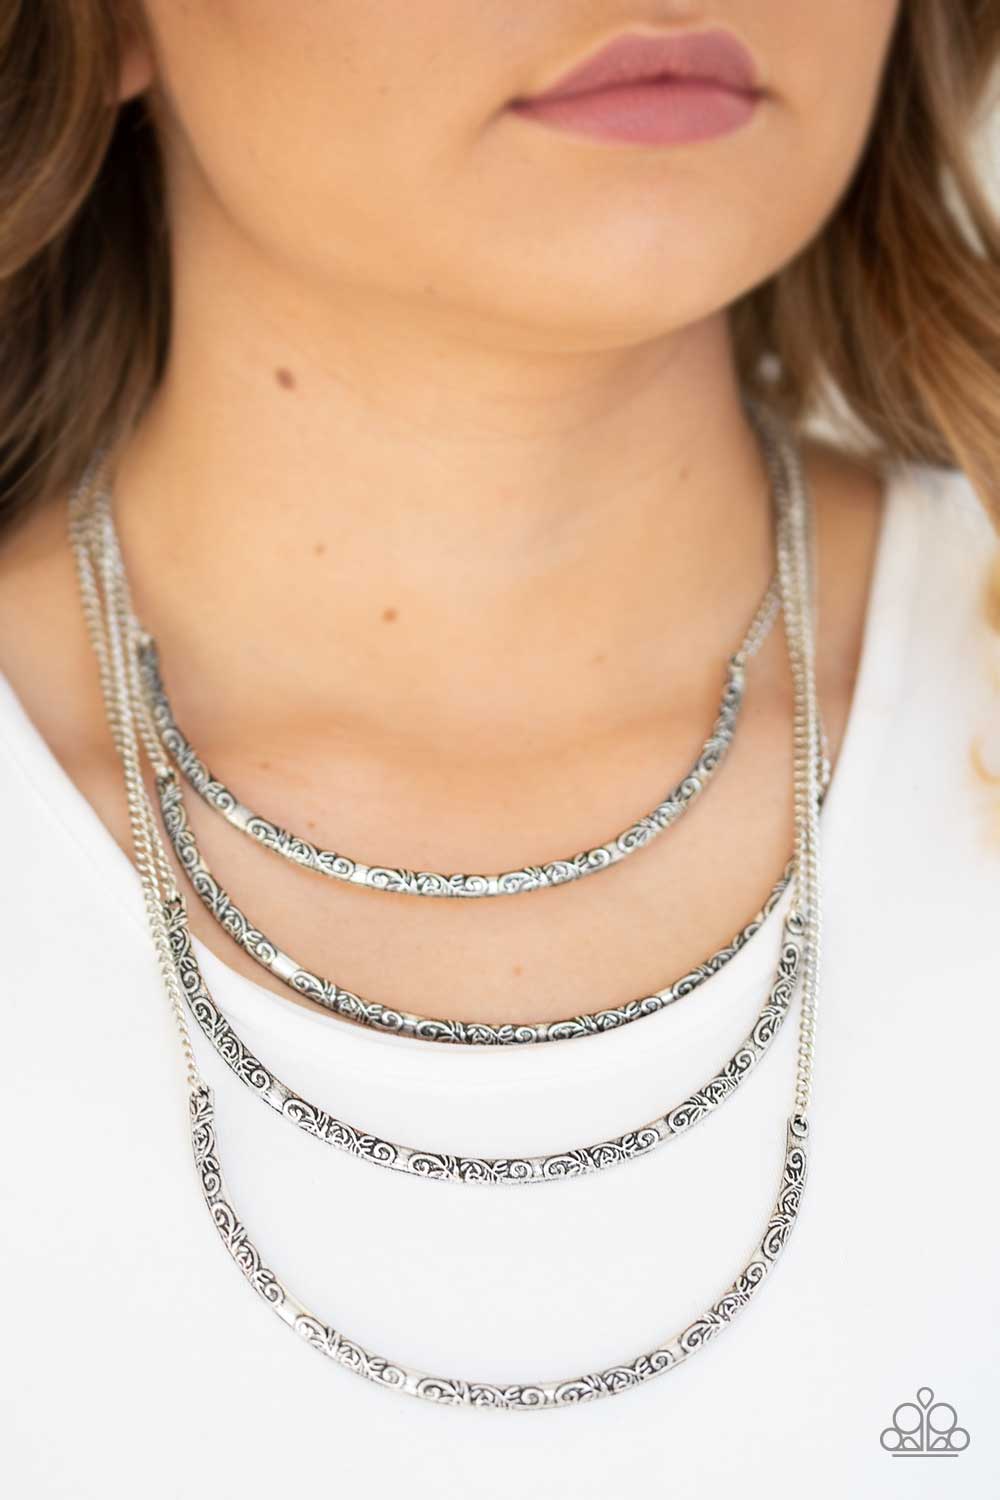 It Will Be Over MOON - Silver Necklace Set - Princess Glam Shop